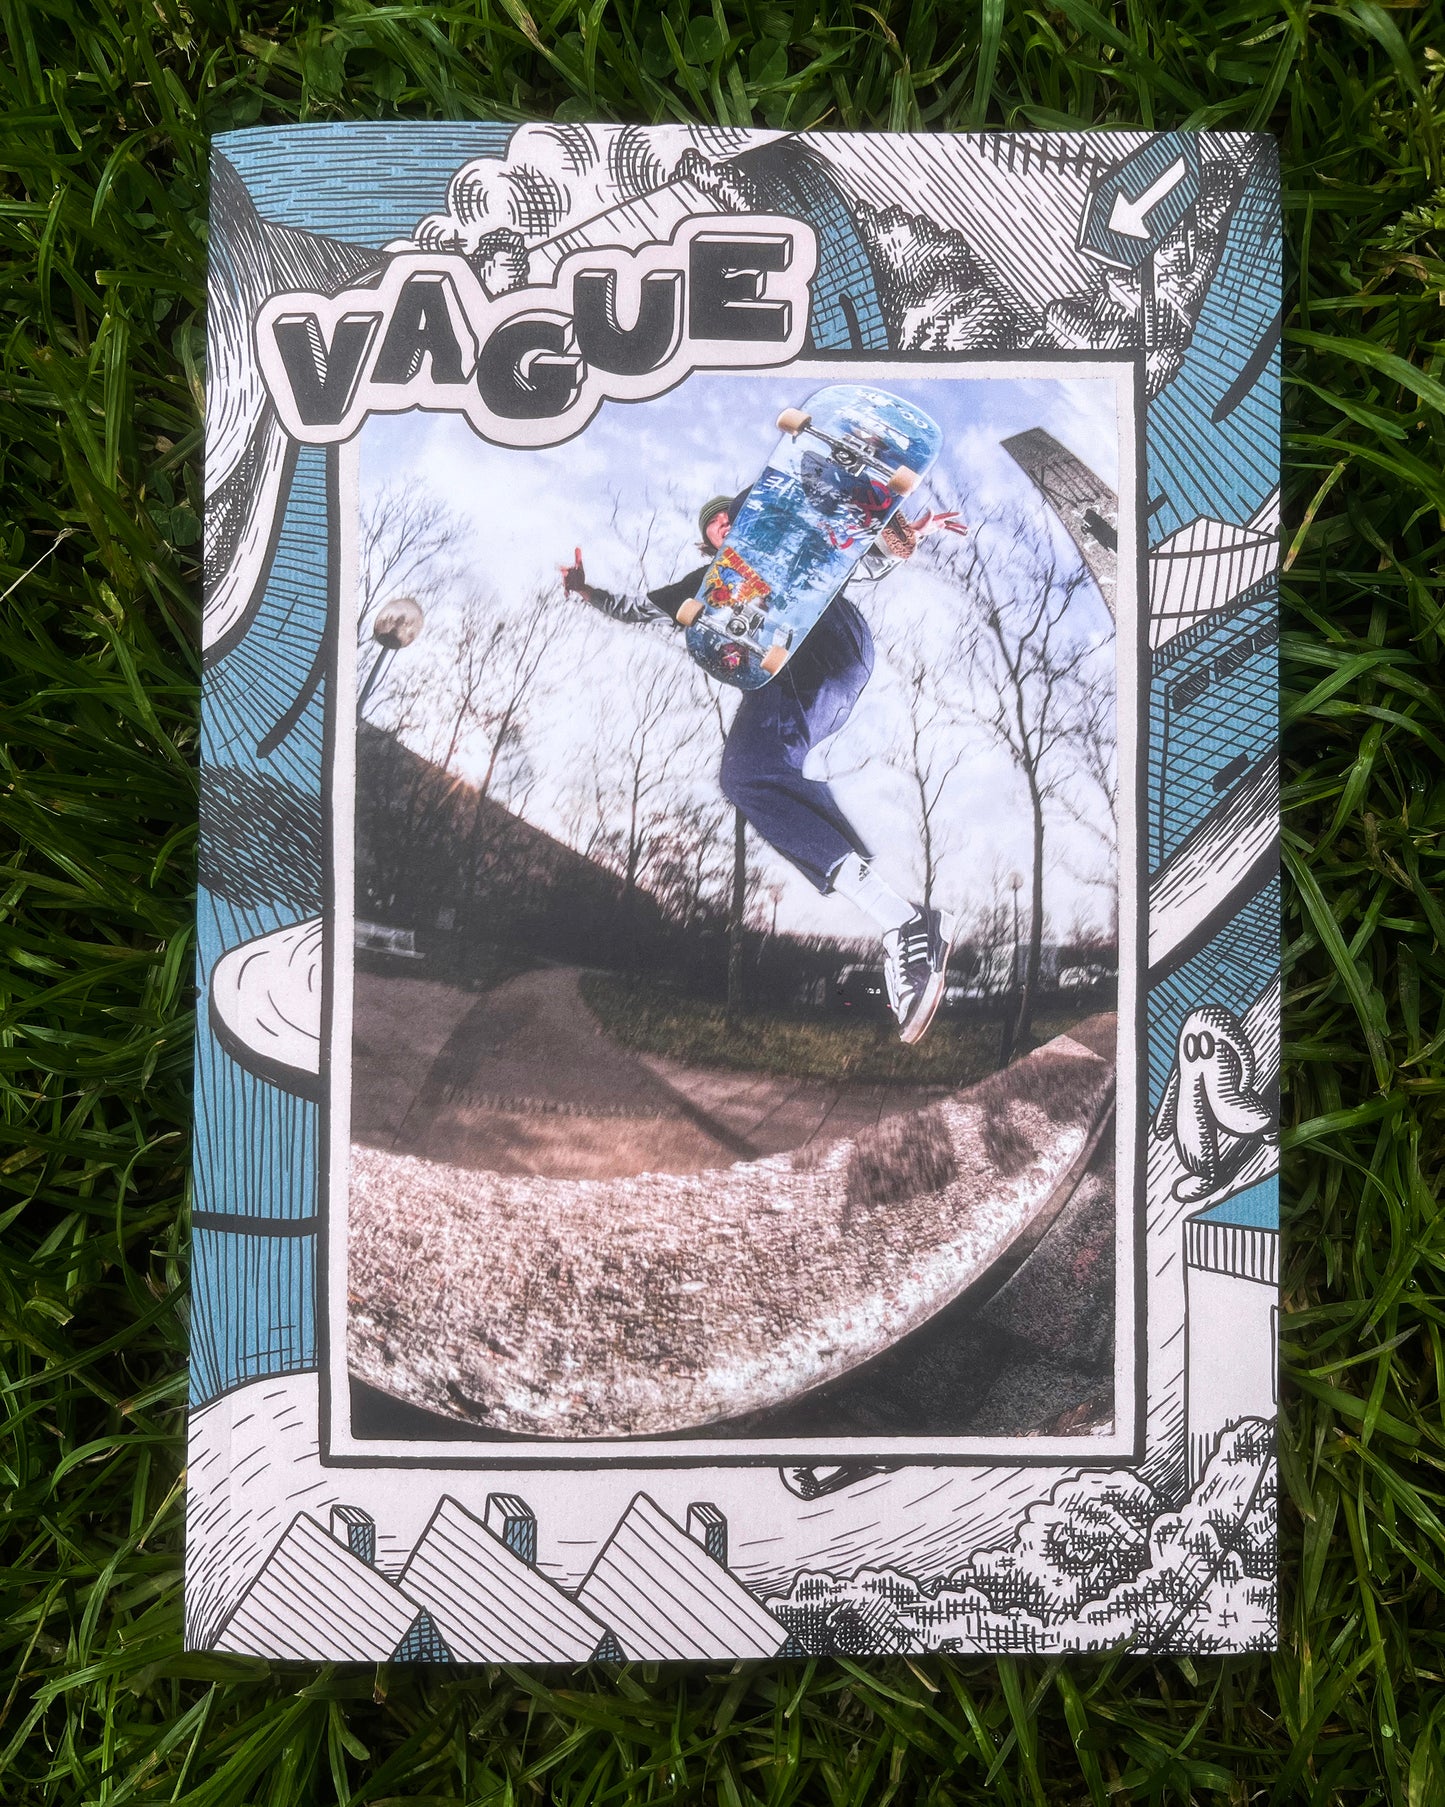 Vague Issue 38